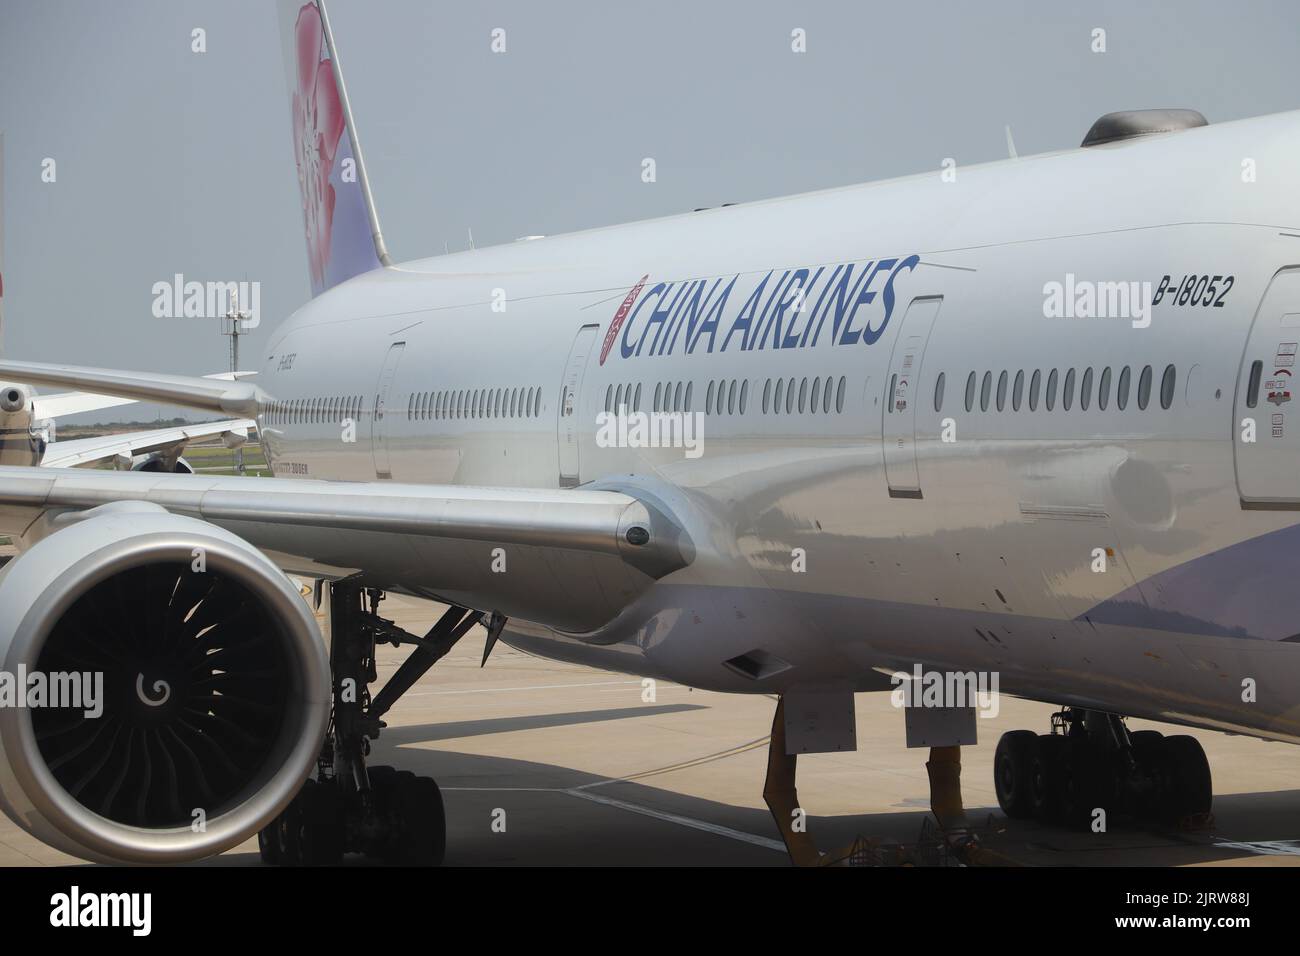 The aircraft body of China Airlines Boeing B777-300ER in Shanghai Pudong Airport Stock Photo